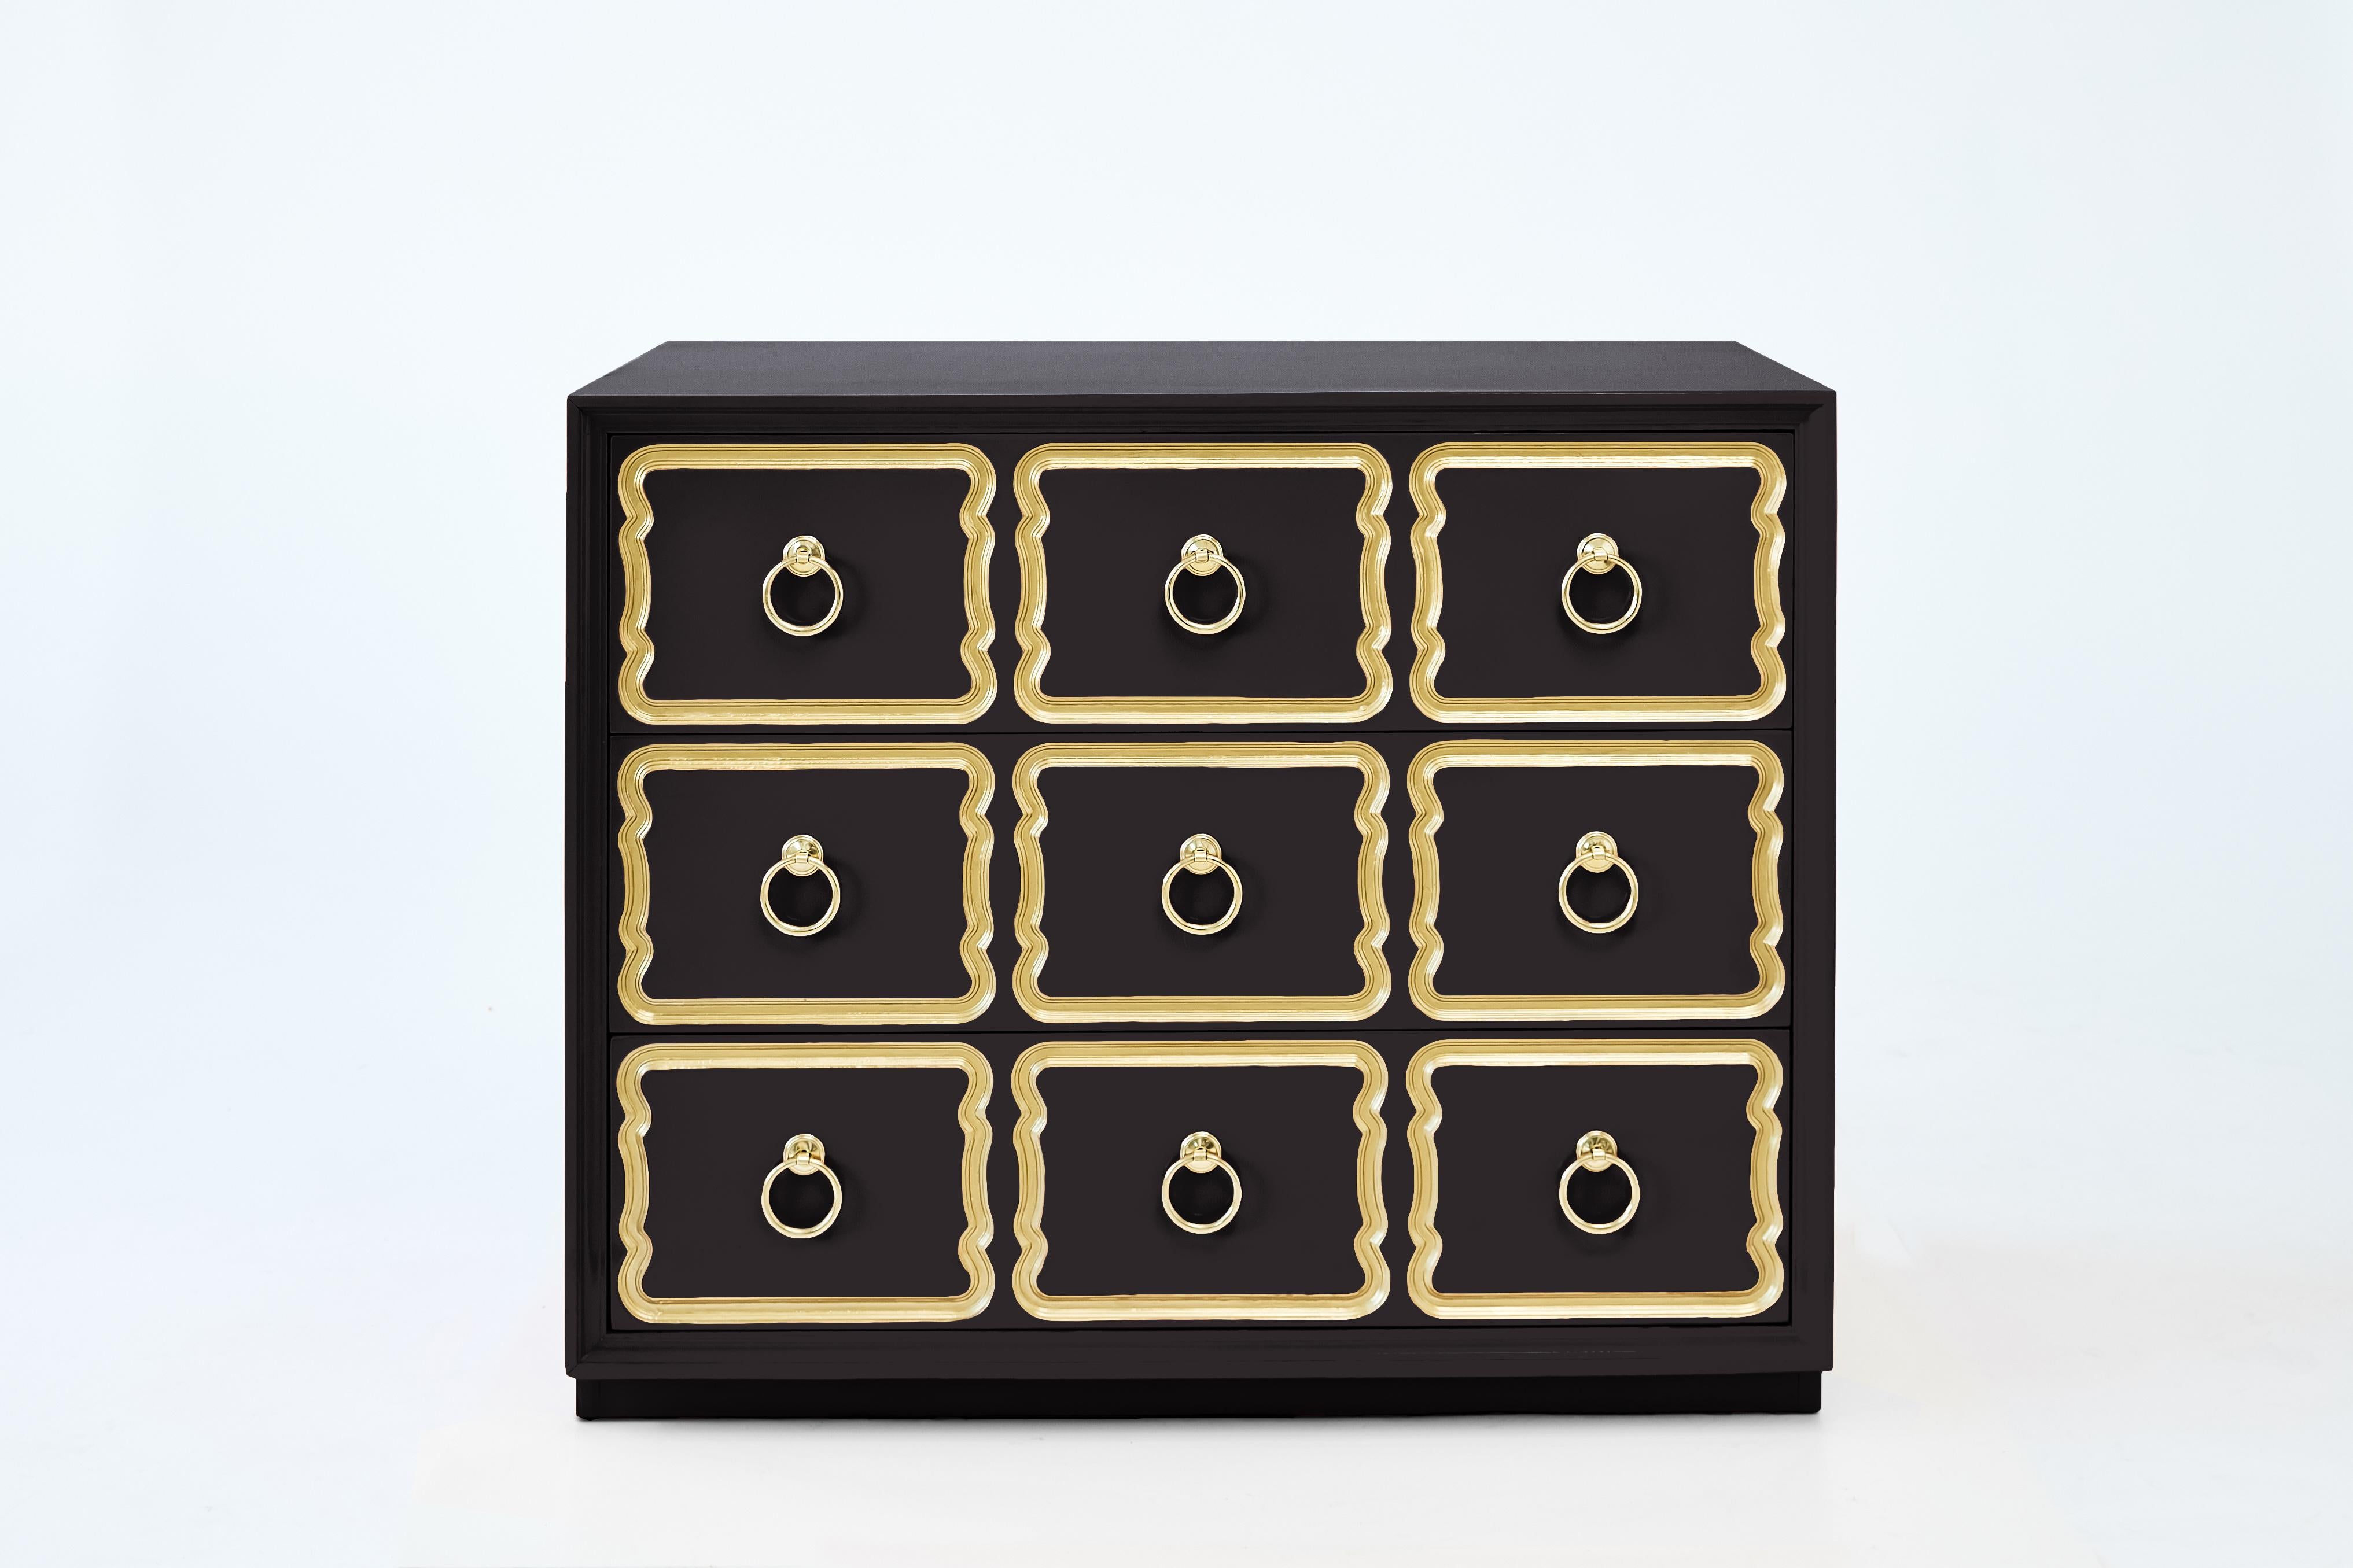 Authentic Dorothy Draper España chests, shown in black bean. The crème de la crème - the most iconic of Hollywood Regency glam - is Dorothy Draper's España bunching chest. Dorothy Draper (1889-1969), America's most famous decorator, produced her